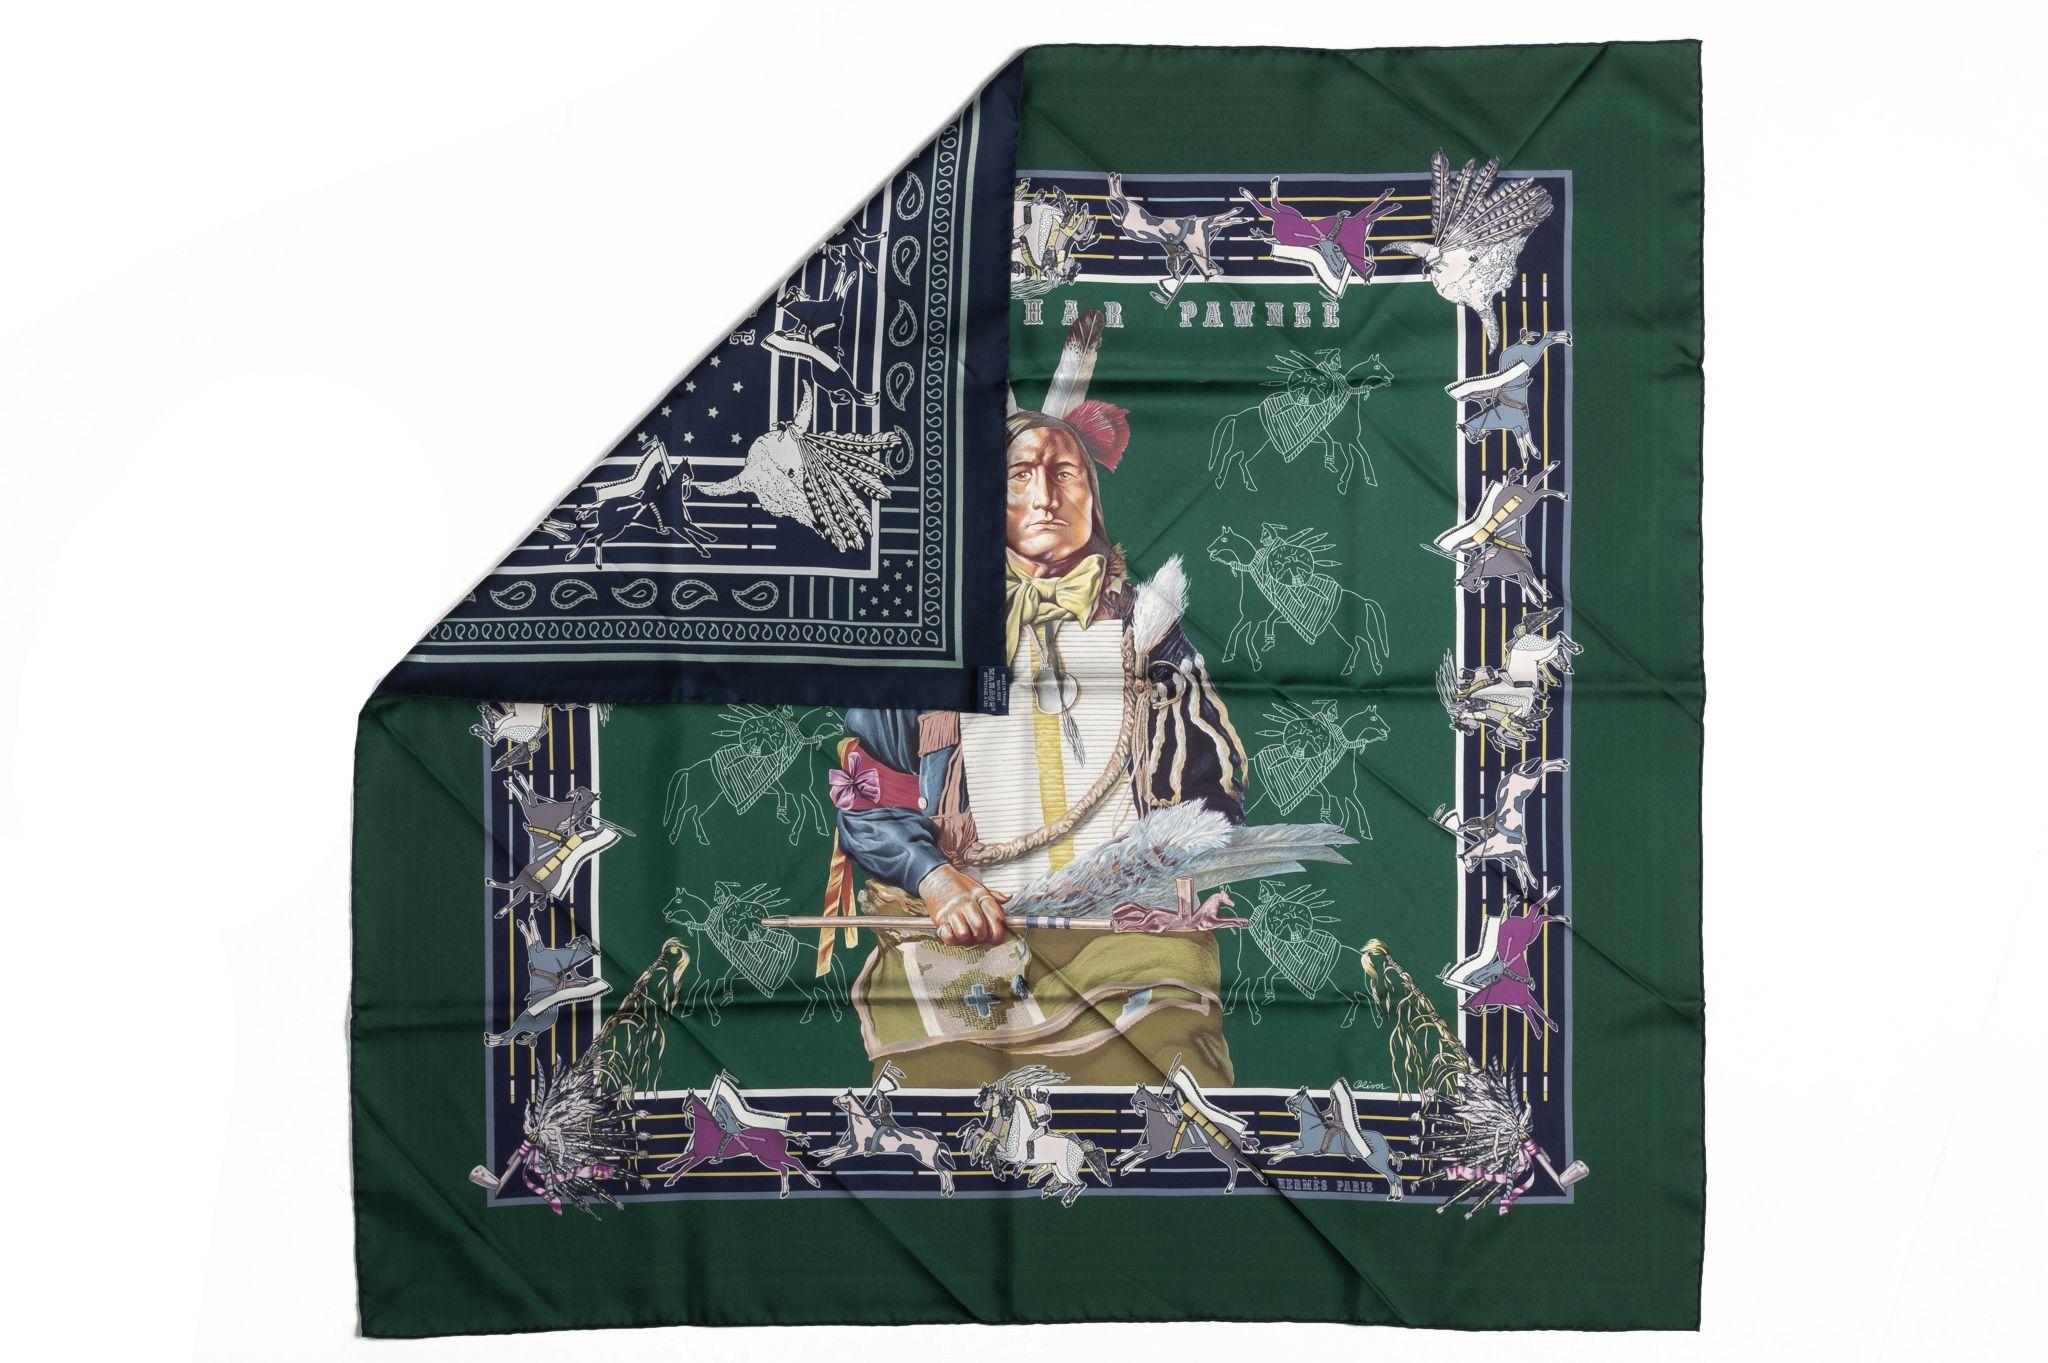 Hermès silk twill Pani La Shar Pawnee 90cm scarf in green with blue color. Designed by artist Kermit Oliver. Limited edition reissue 